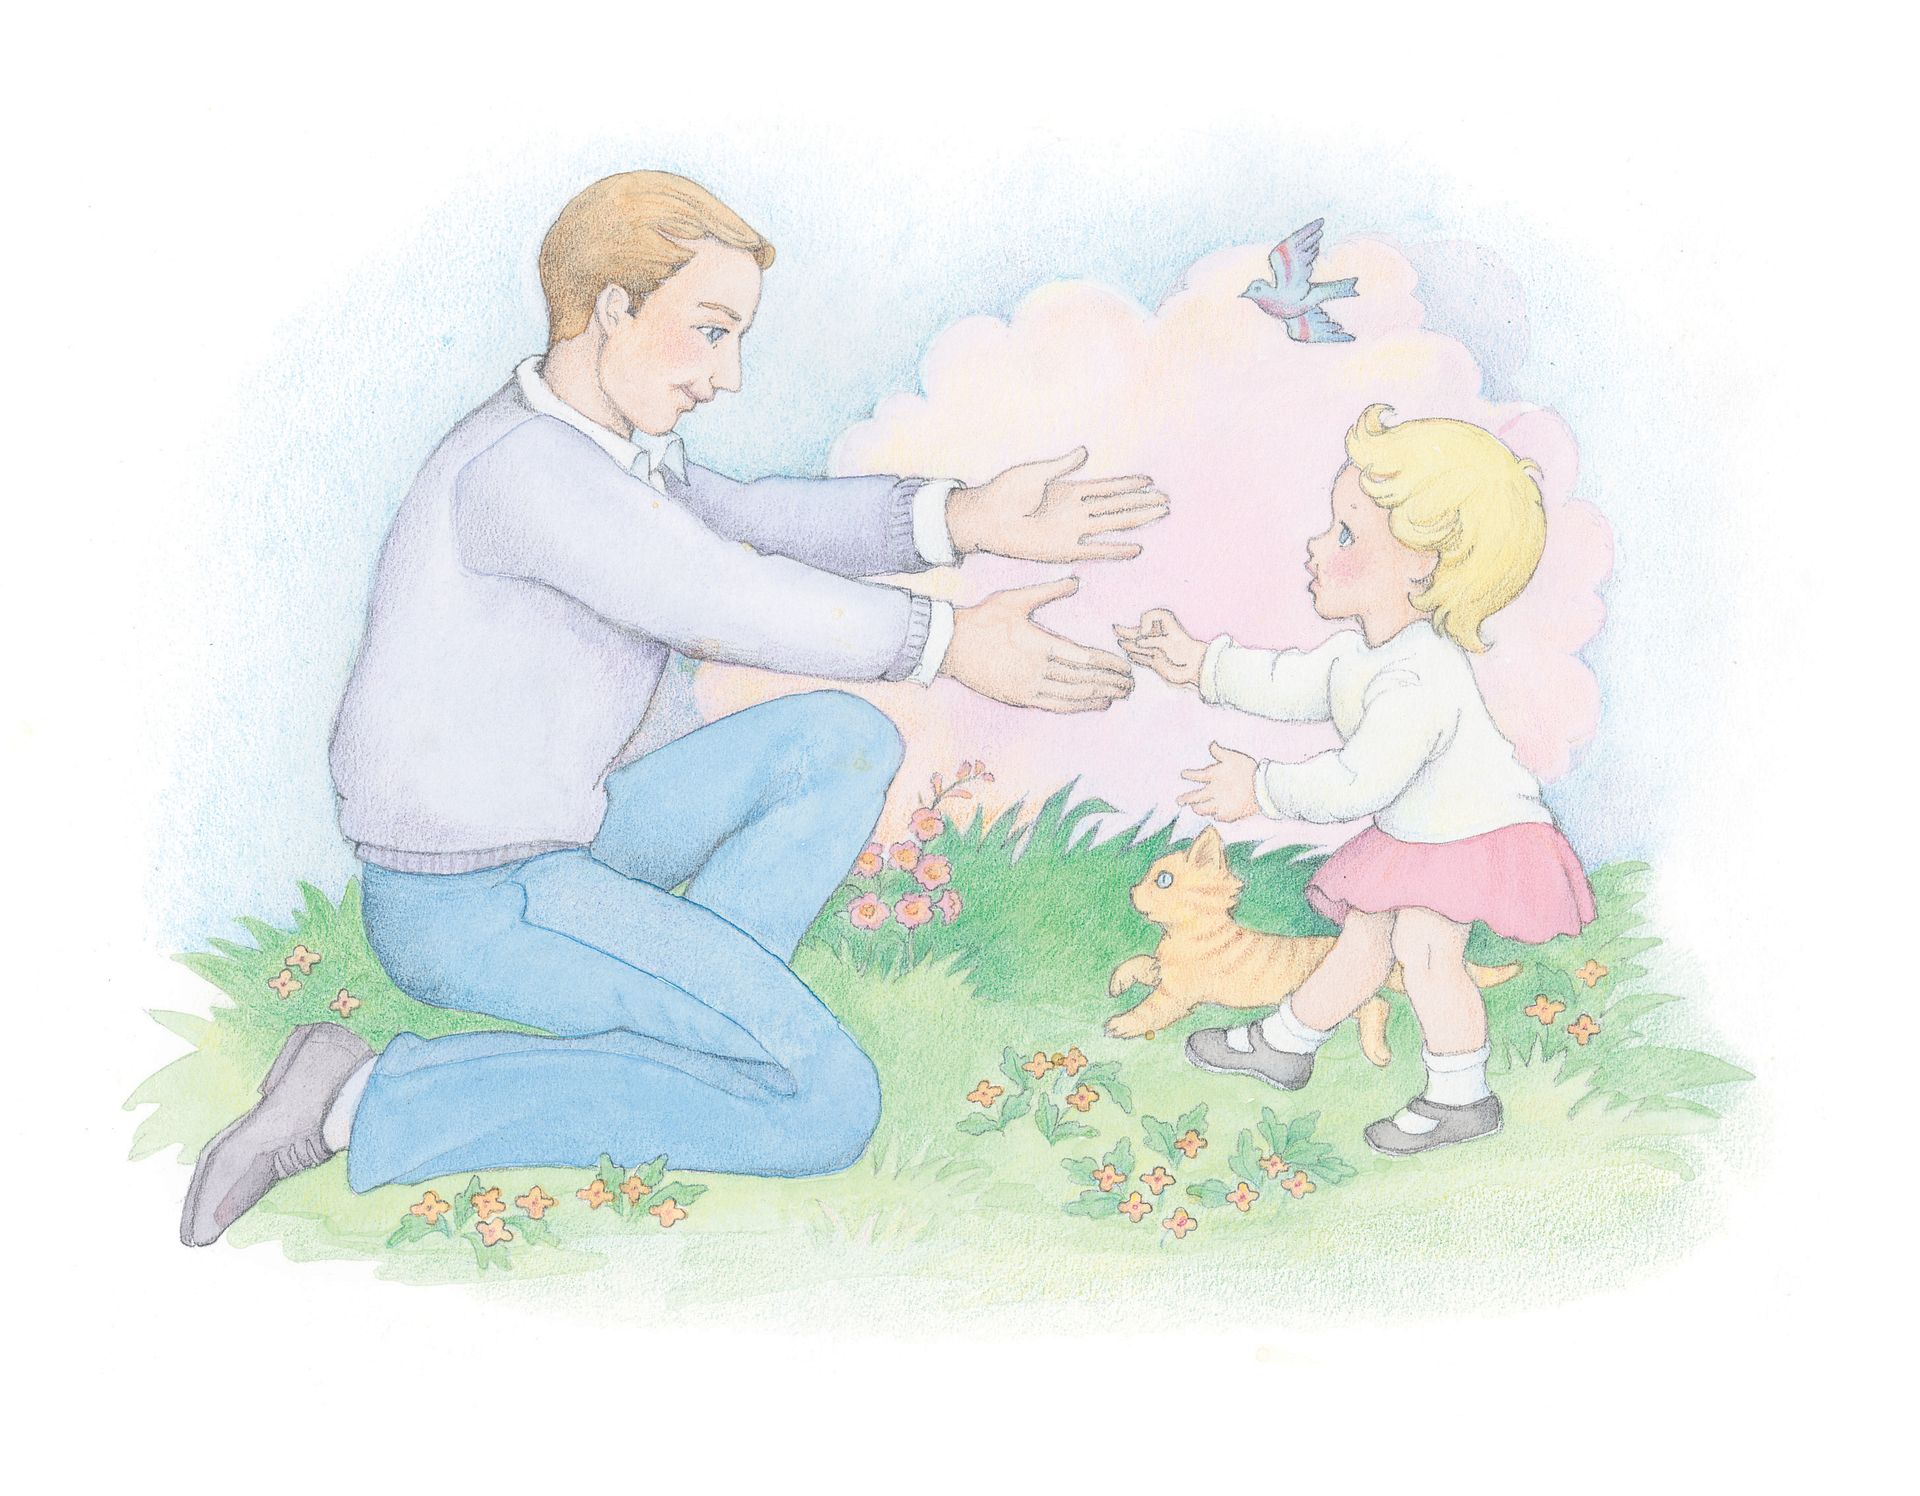 A toddler walking toward her father. From the Children’s Songbook, page 180, “How Dear to God Are Little Children”; watercolor illustration by Phyllis Luch.